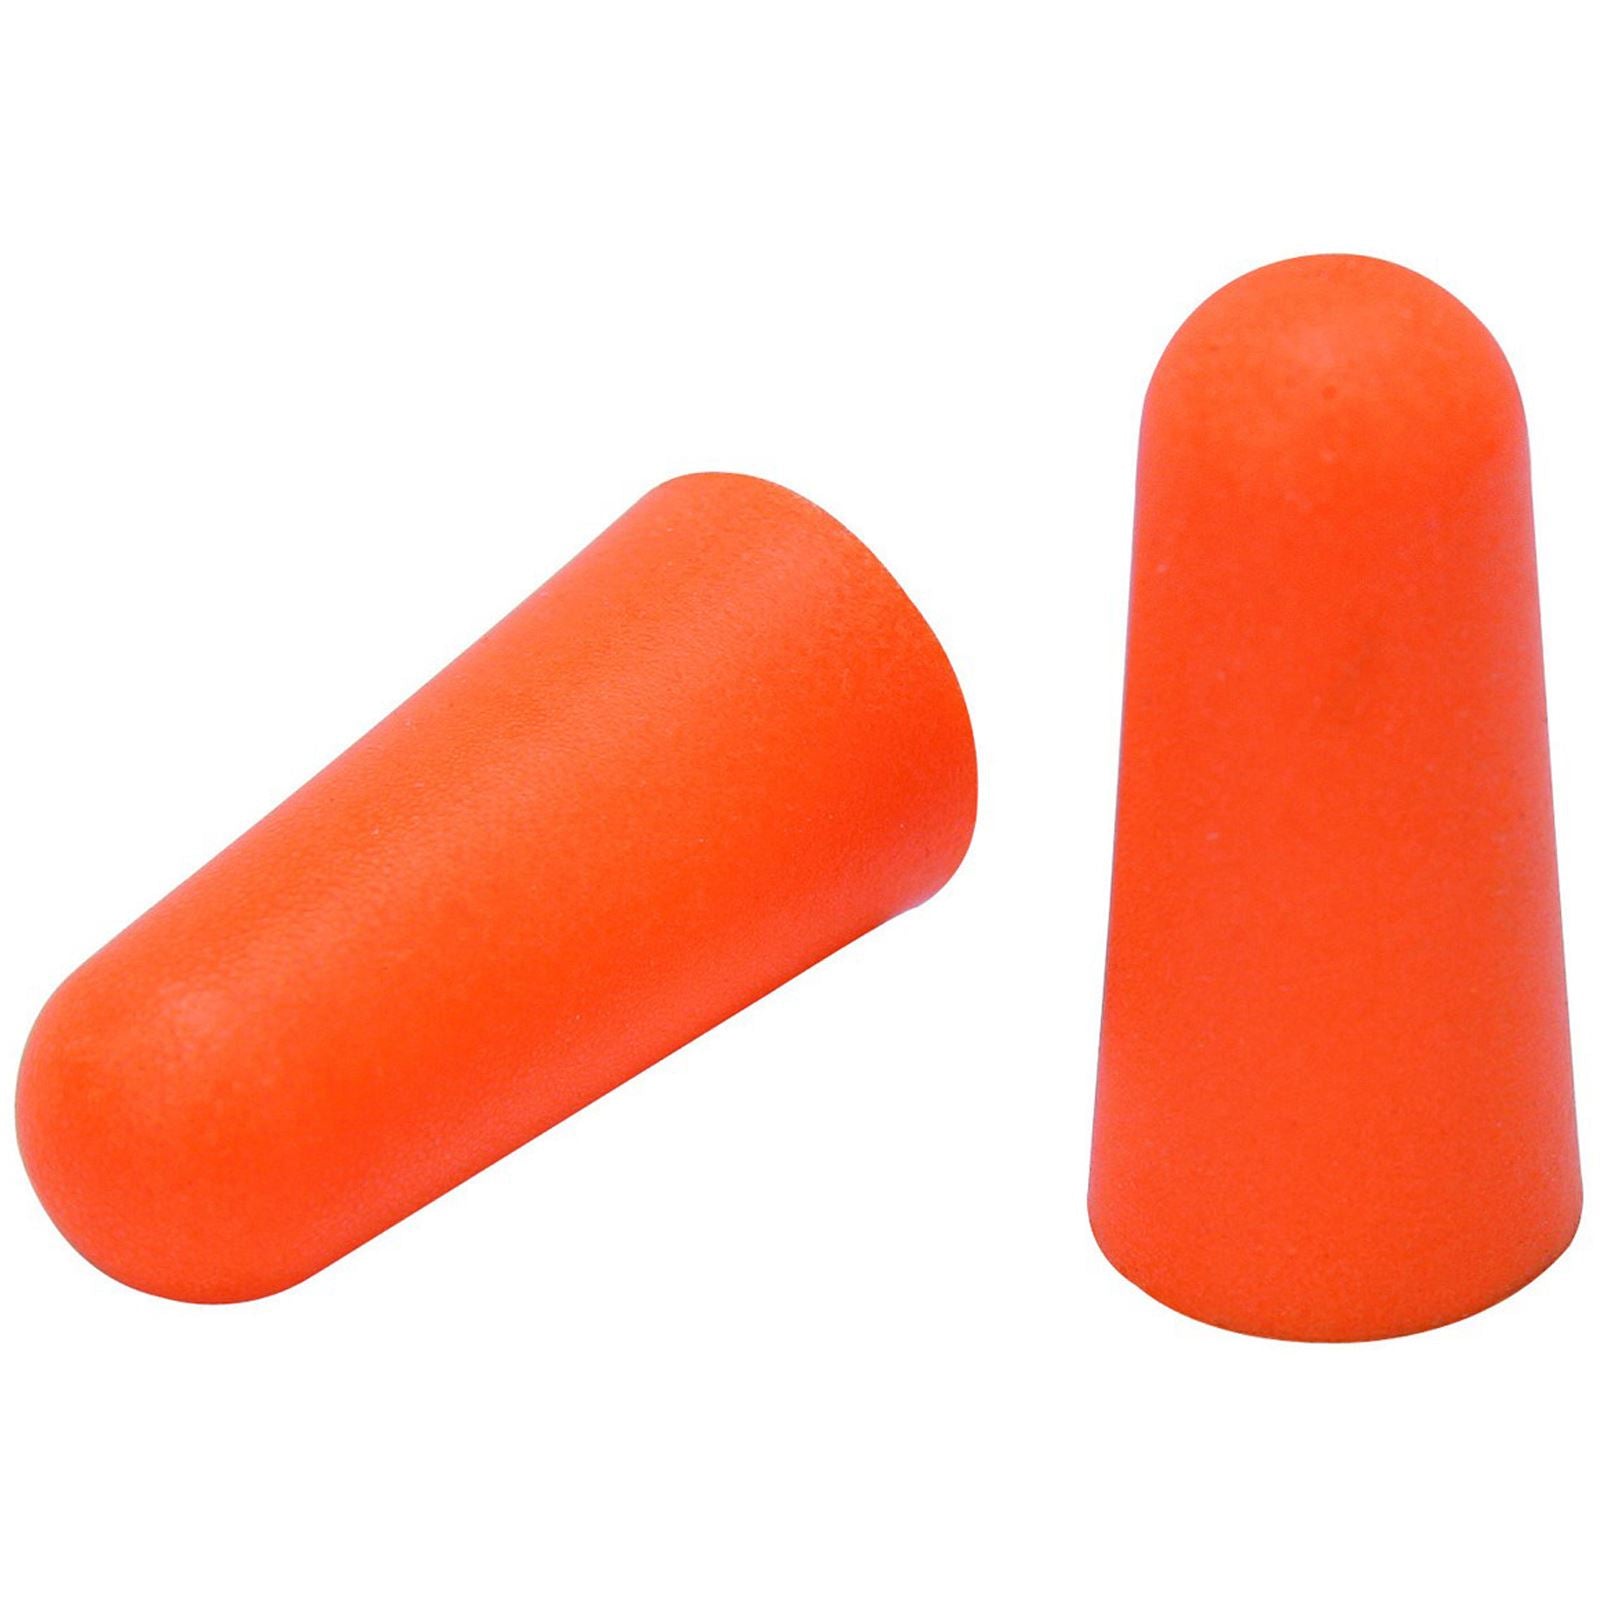 Silverline 2 Piece Ear Plugs SNR 37dB Disposable Hygienic Hearing Protection